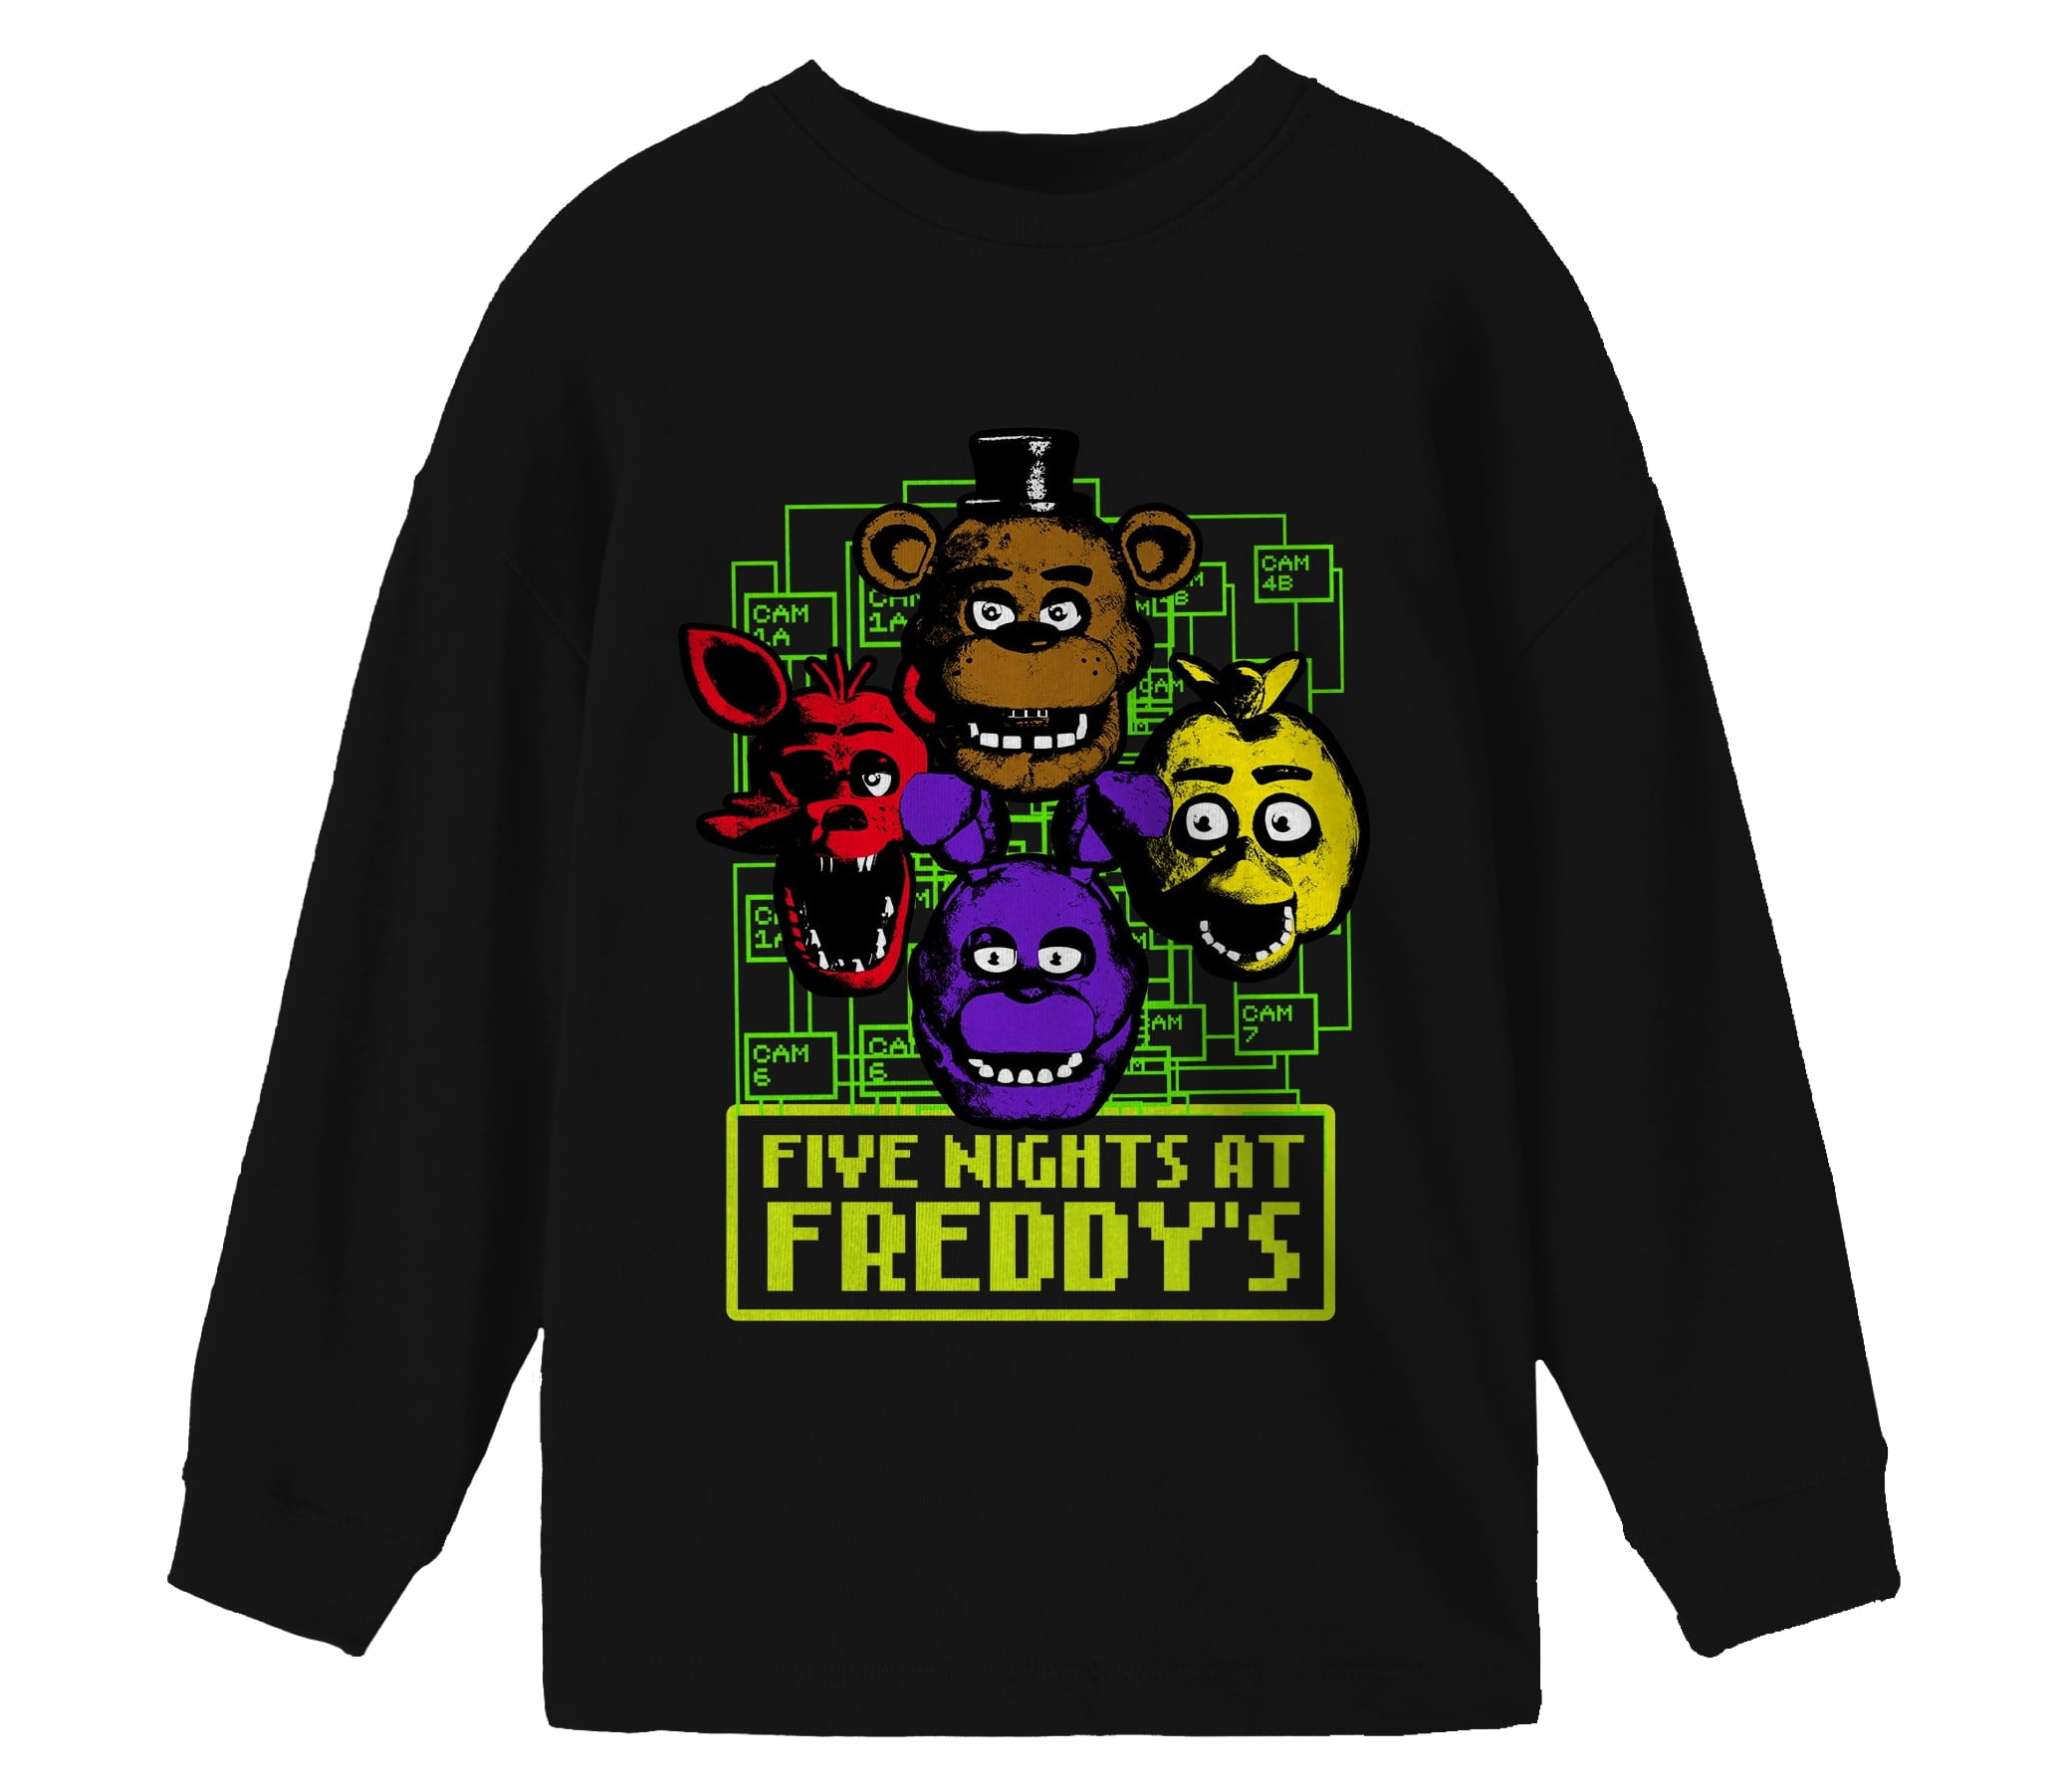 Five Nights at Freddy's Characters and Cameras Boy's Black Long Sleeve  Shirt-L 